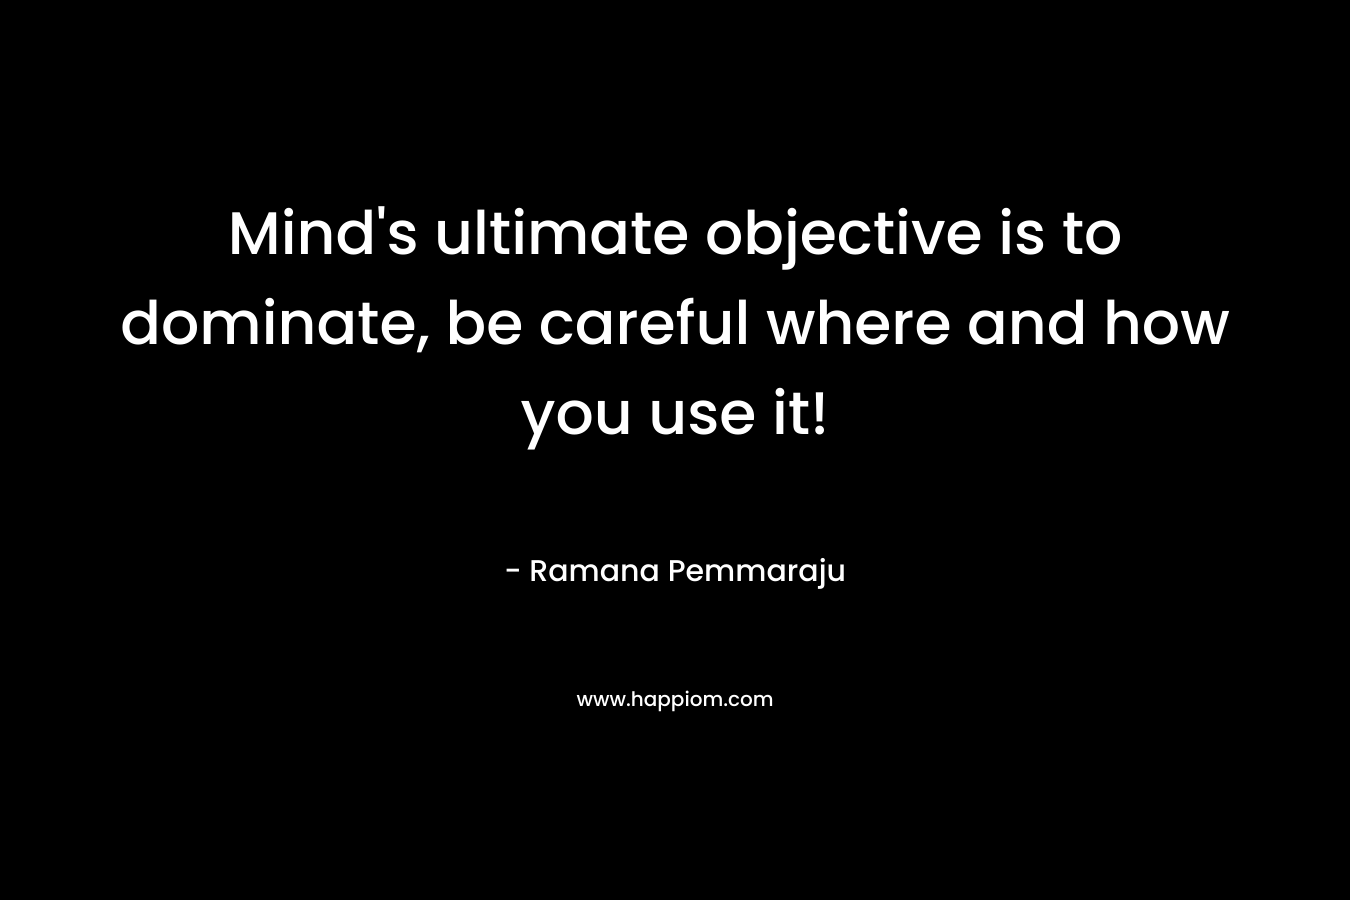 Mind's ultimate objective is to dominate, be careful where and how you use it!